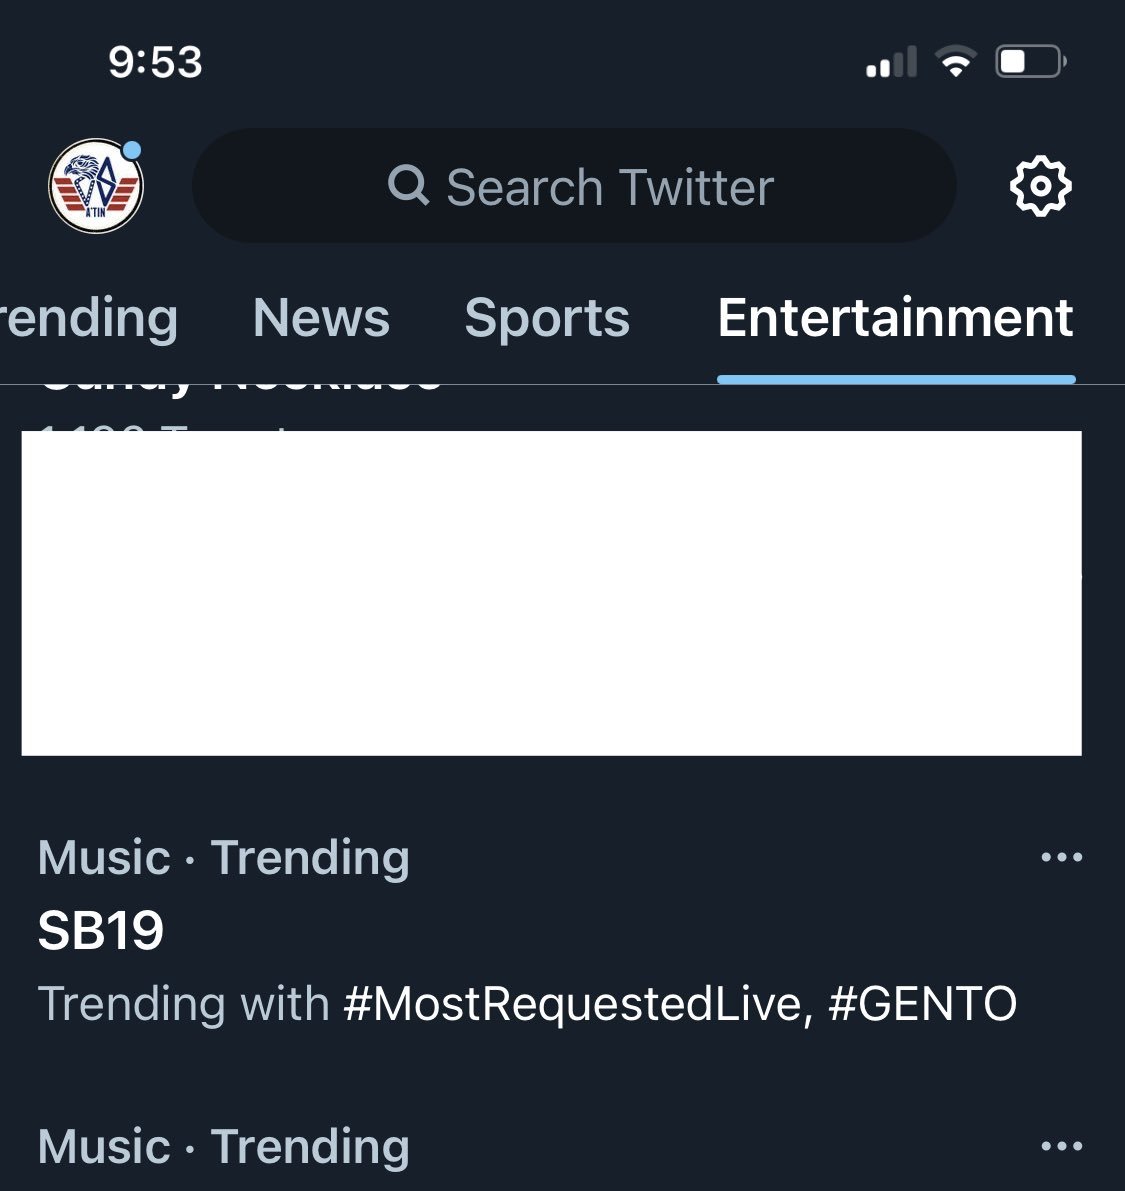 💥🥳Yes!! #GENTO by #SB19 is trending here in the US!! Catch the wave and stream it now!❤️‍🔥

Watch 'GENTO' Music Video 
🔗 youtu.be/VZZA_38RUBI 

Stream GENTO here :  lnk.to/SB19-Gento

@SB19Official 
#SB19GENTO